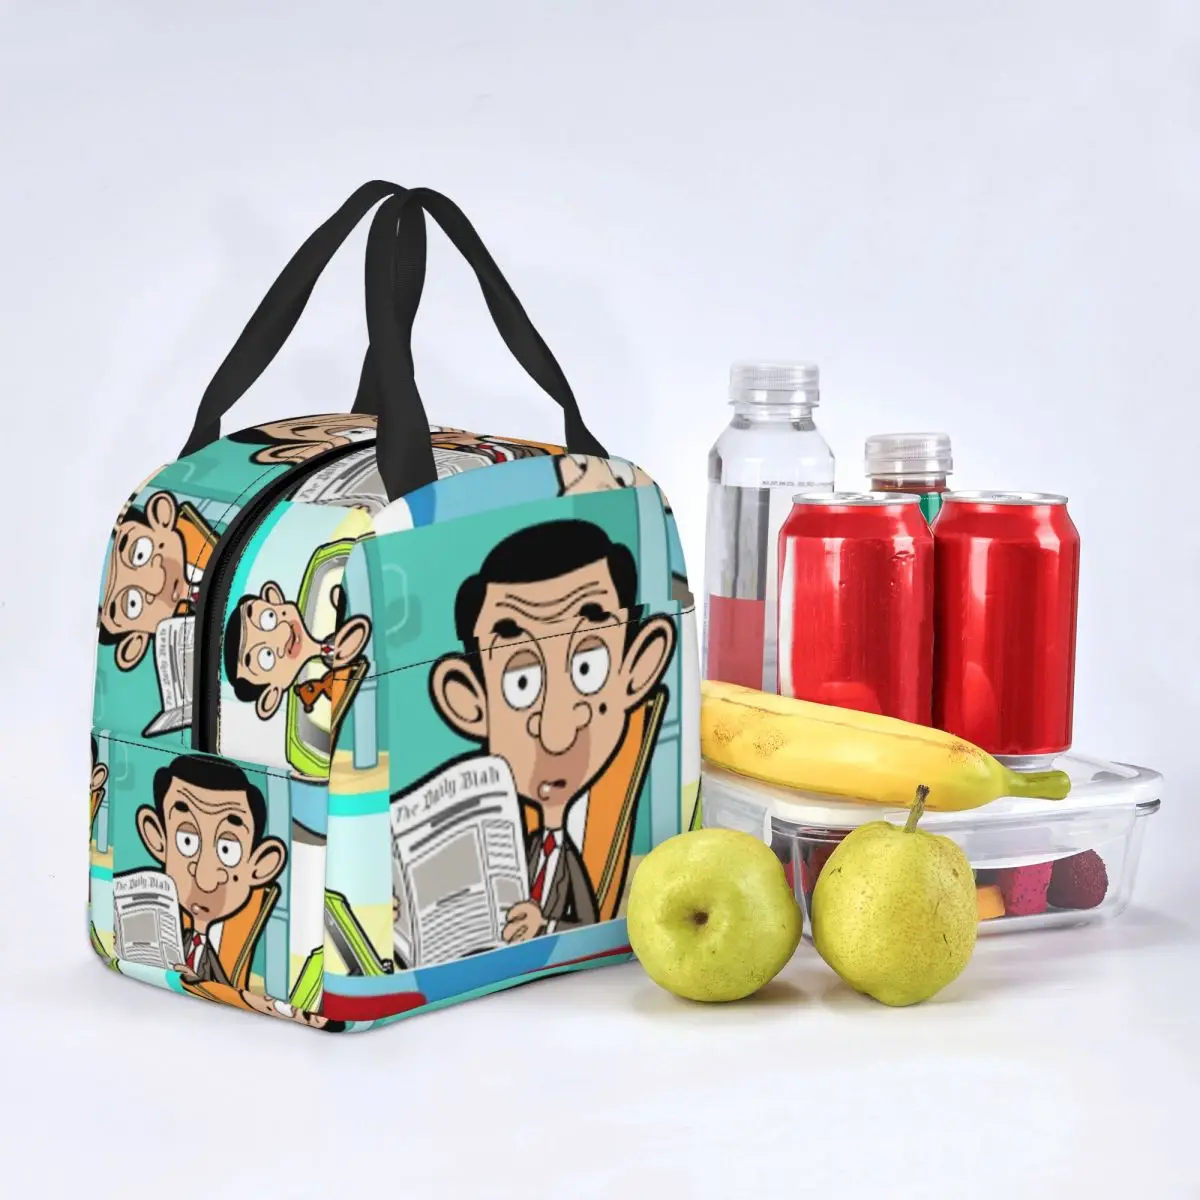 Mr Bean Insulated Lunch Bags for Outdoor Picnic British Cartoon Animated Tv Resuable Cooler Thermal Lunch Box Women Children images - 6